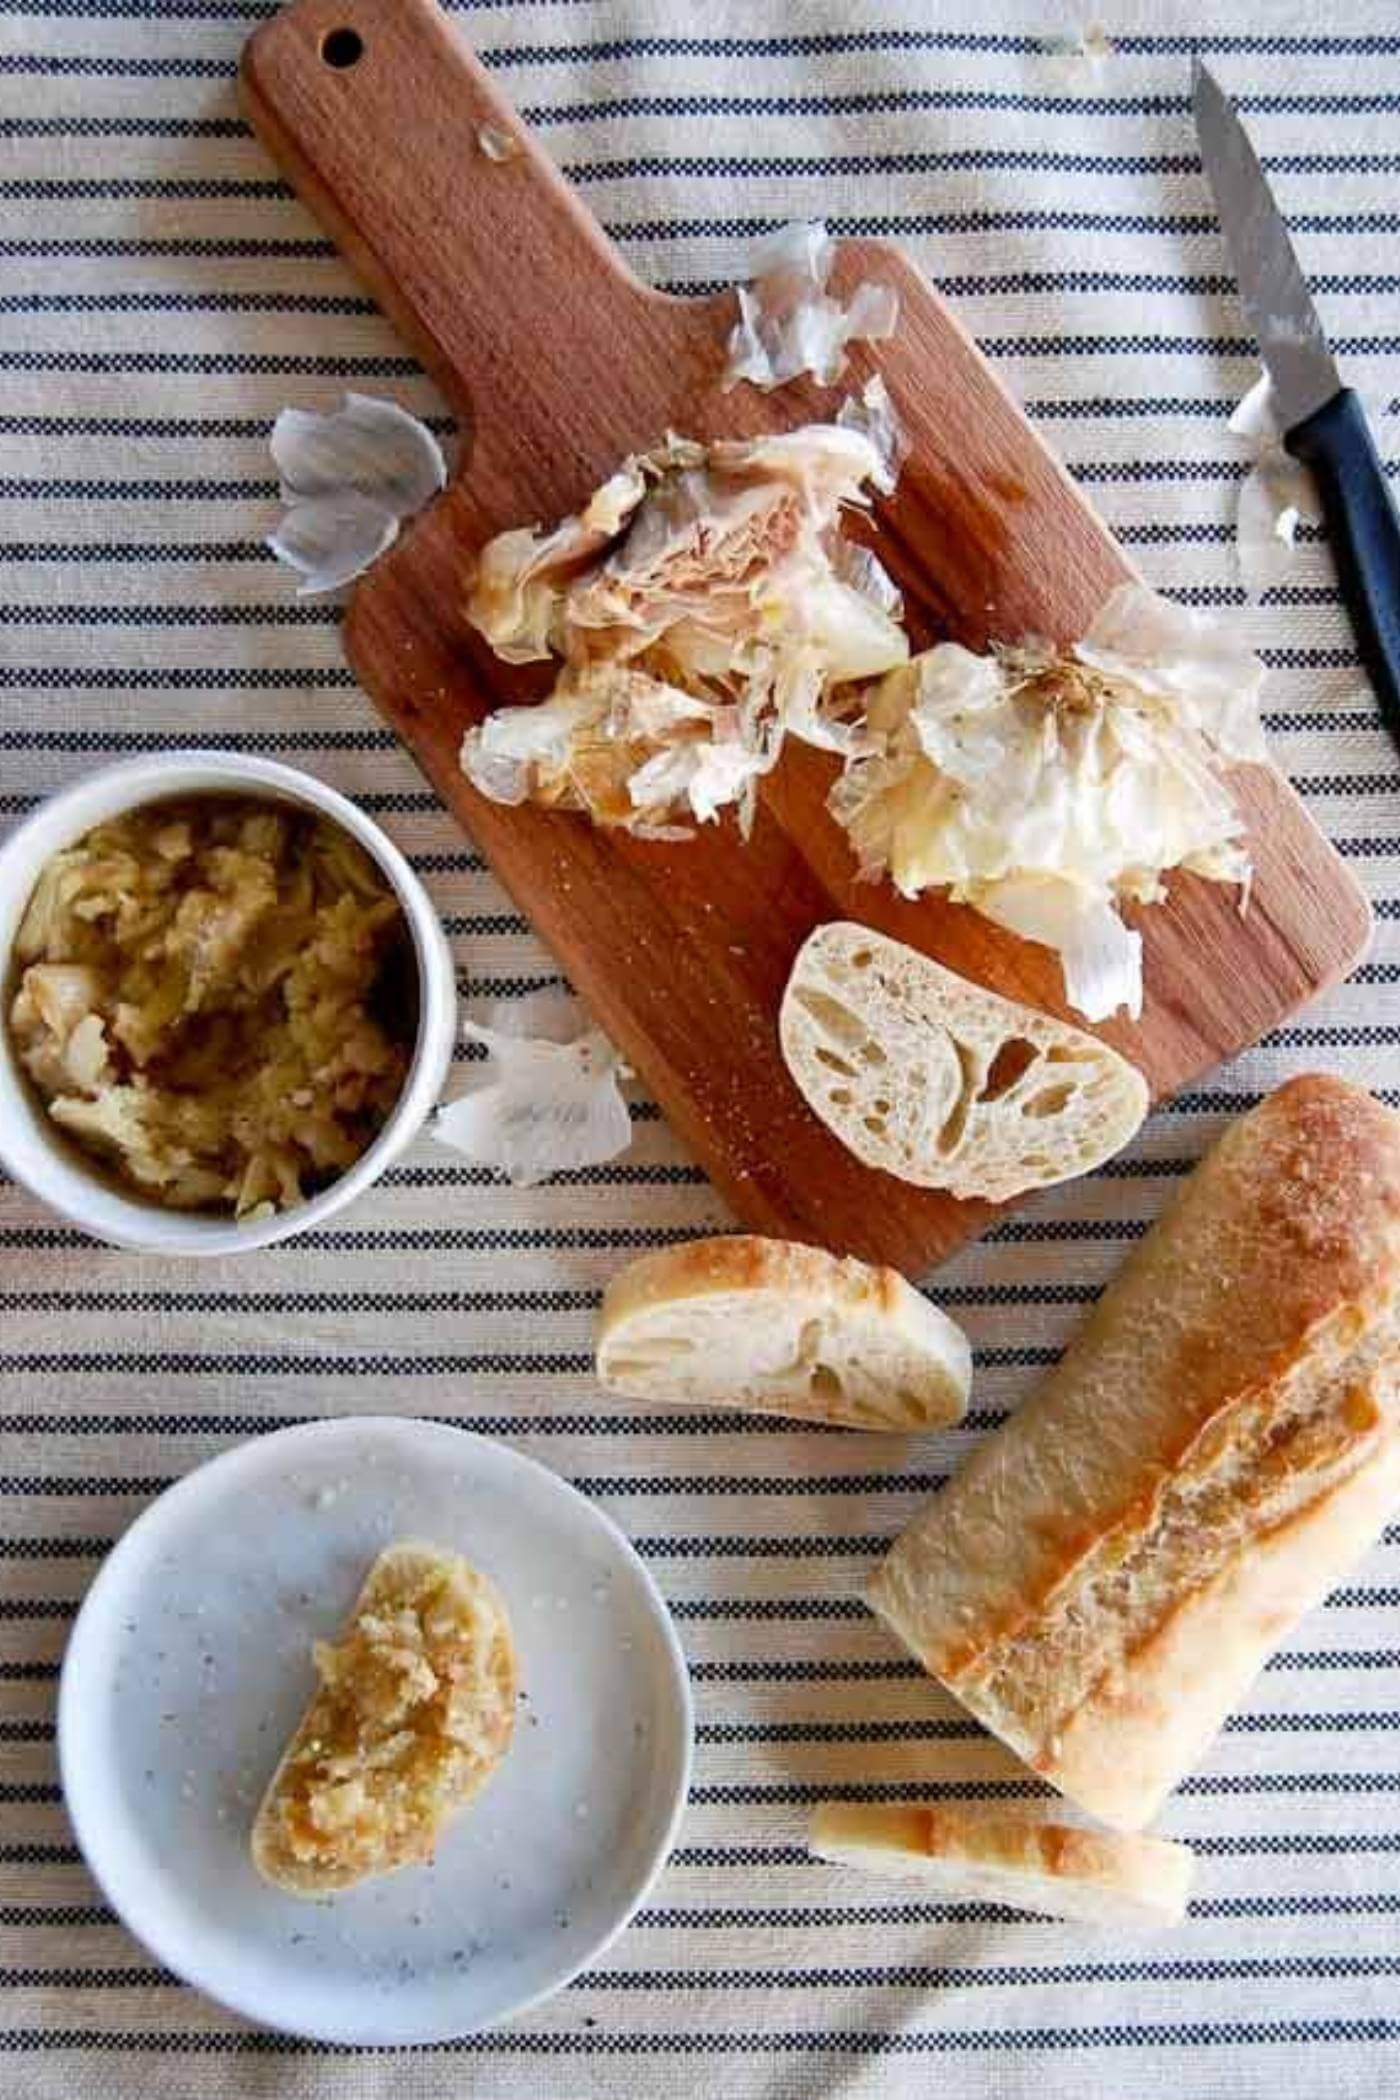 roasted garlic in bowl with bread